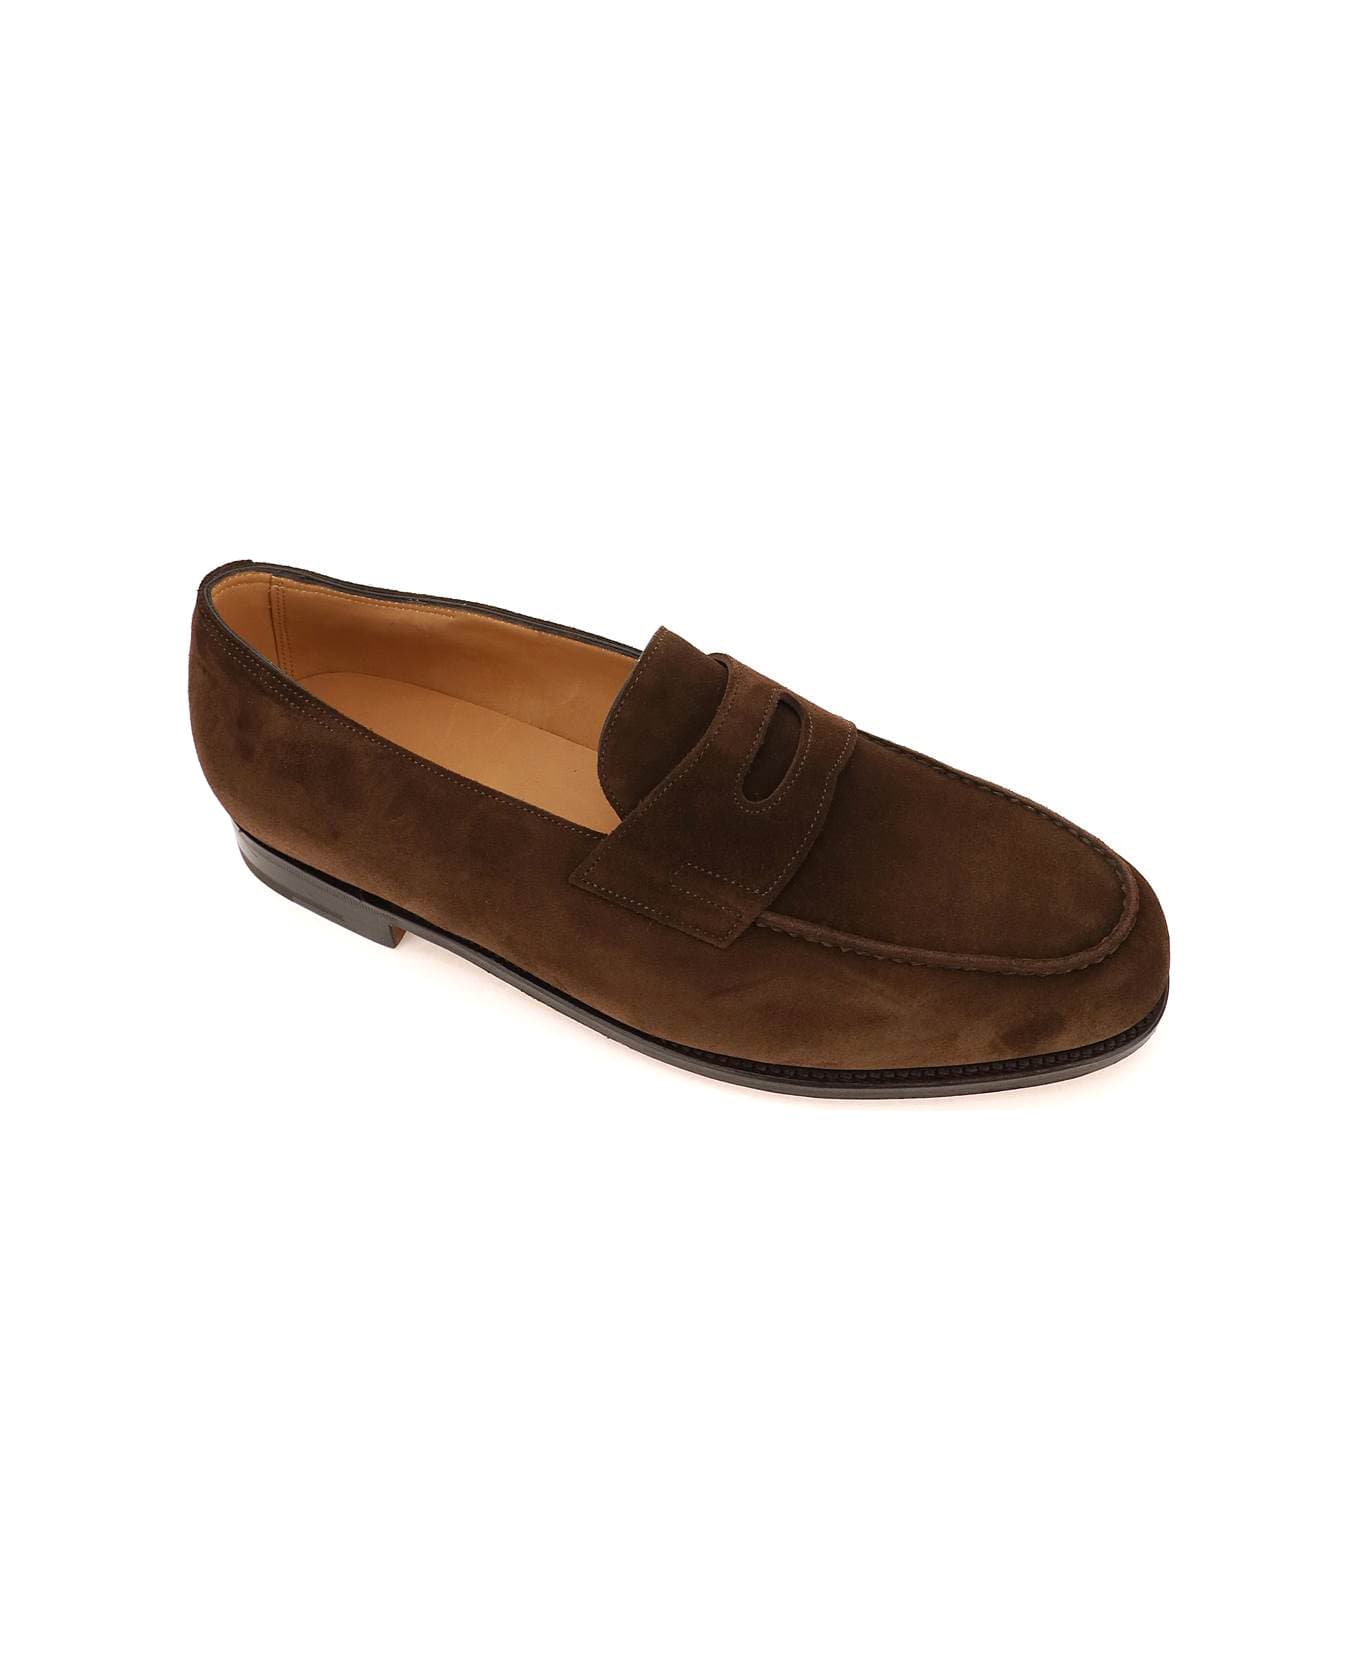 John Lobb Suede Leather Lopez Penny Loafers - DARK BROWN (Brown)